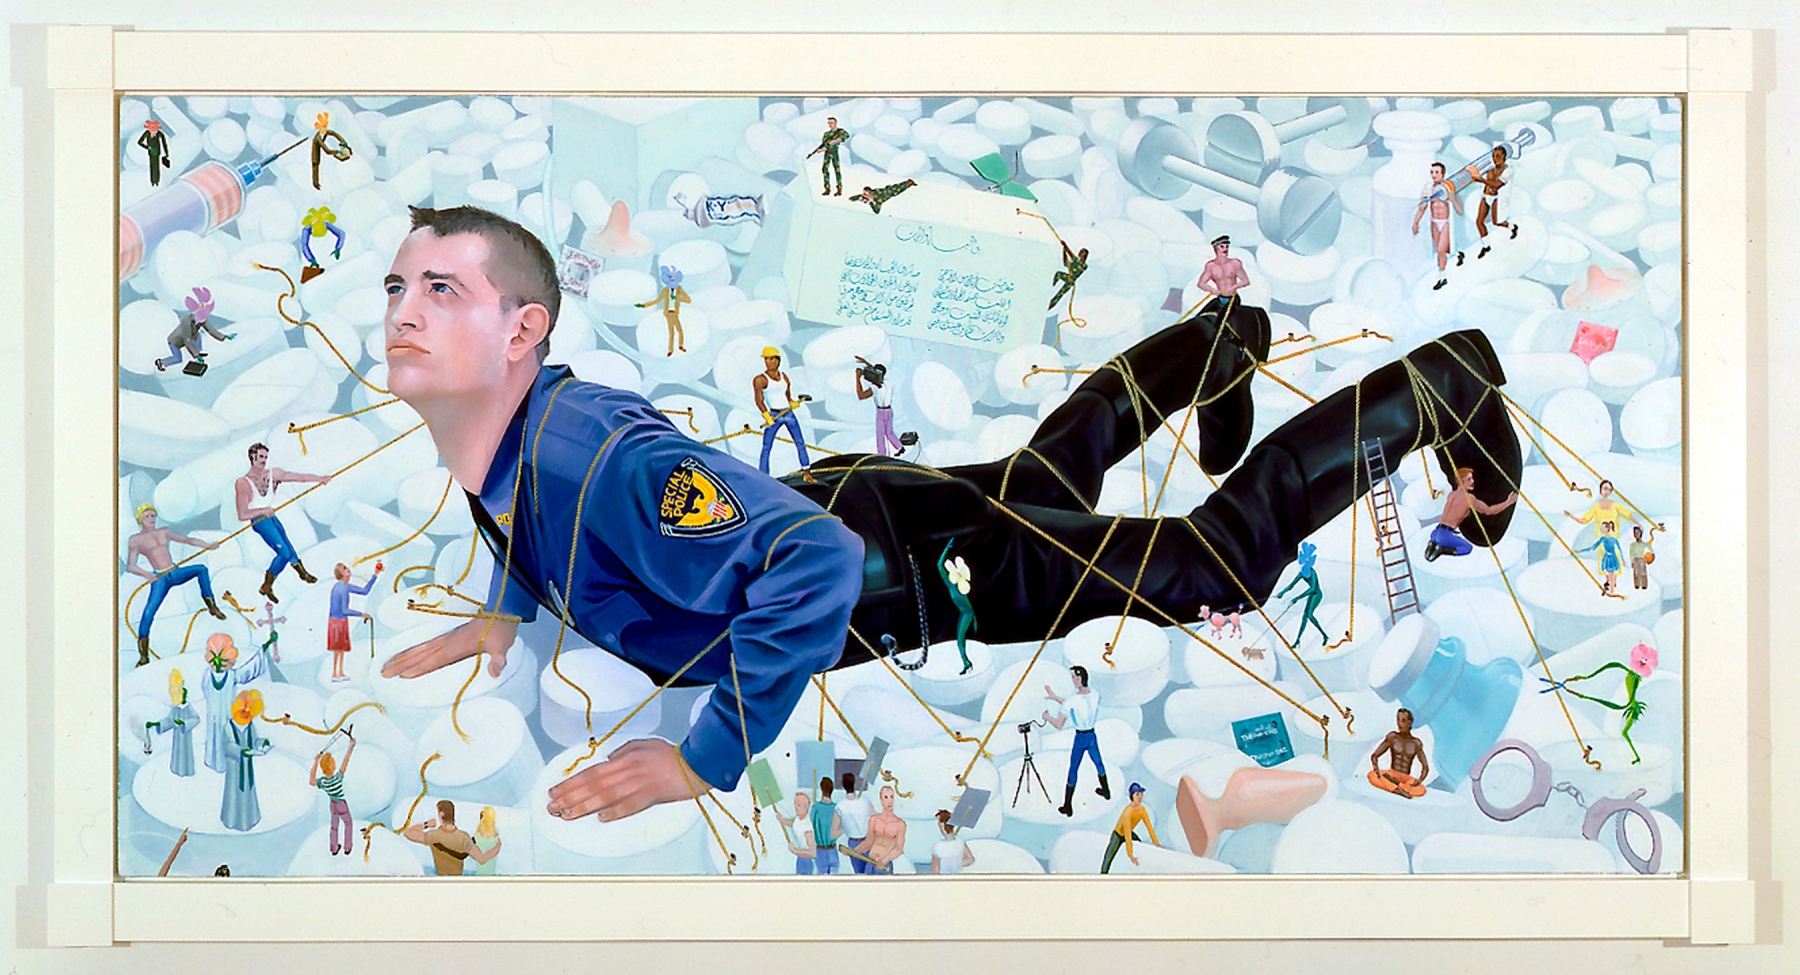 Frank Moore
Gulliver Awake, 1994-95
oil on canvas on panel with enamel frame
40 1/8 x 74 inches (101,9 x 188 cm)
SW 95093
Private Collection